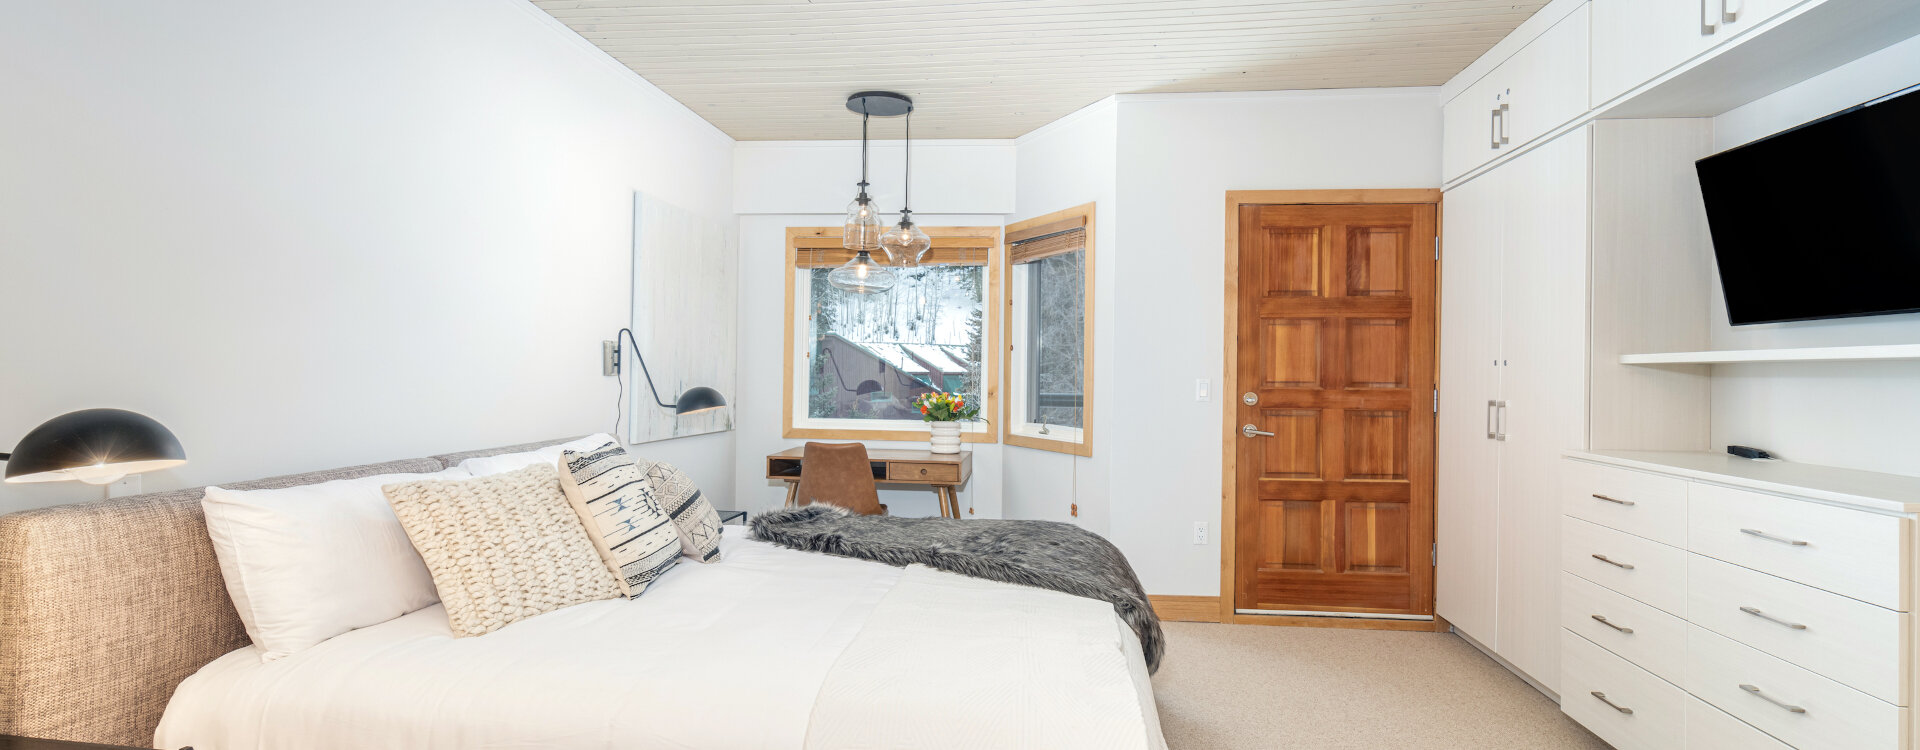 -Telluride-Vacation-Rental-Ice-House-305-Primary-Suite-2